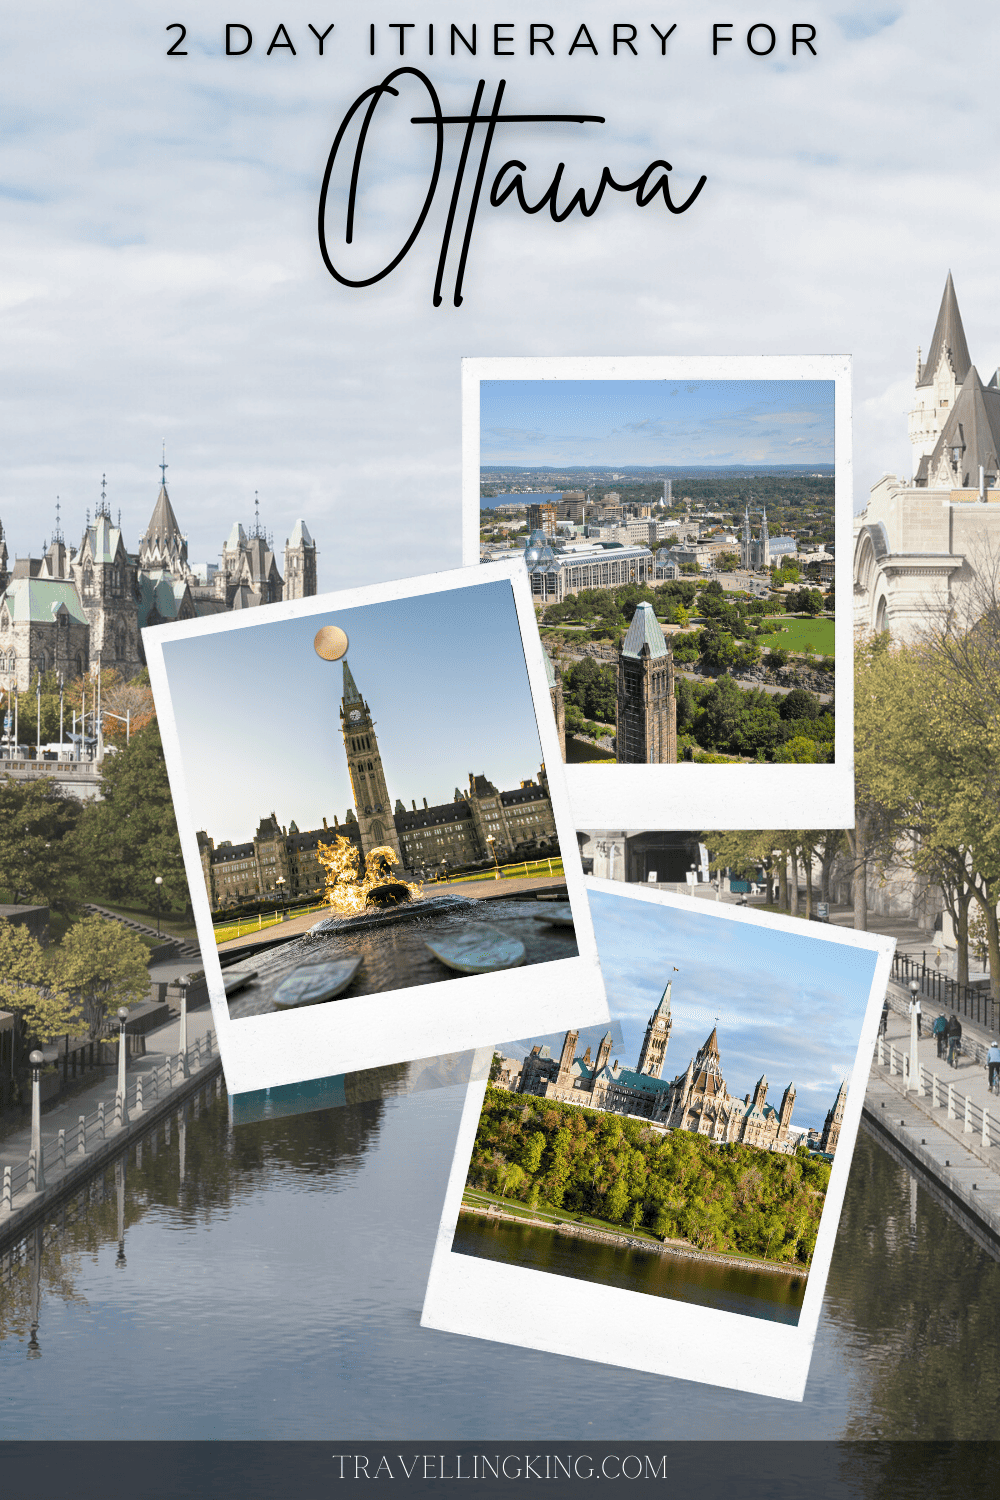 48 Hours in Ottawa - 2 Day Itinerary